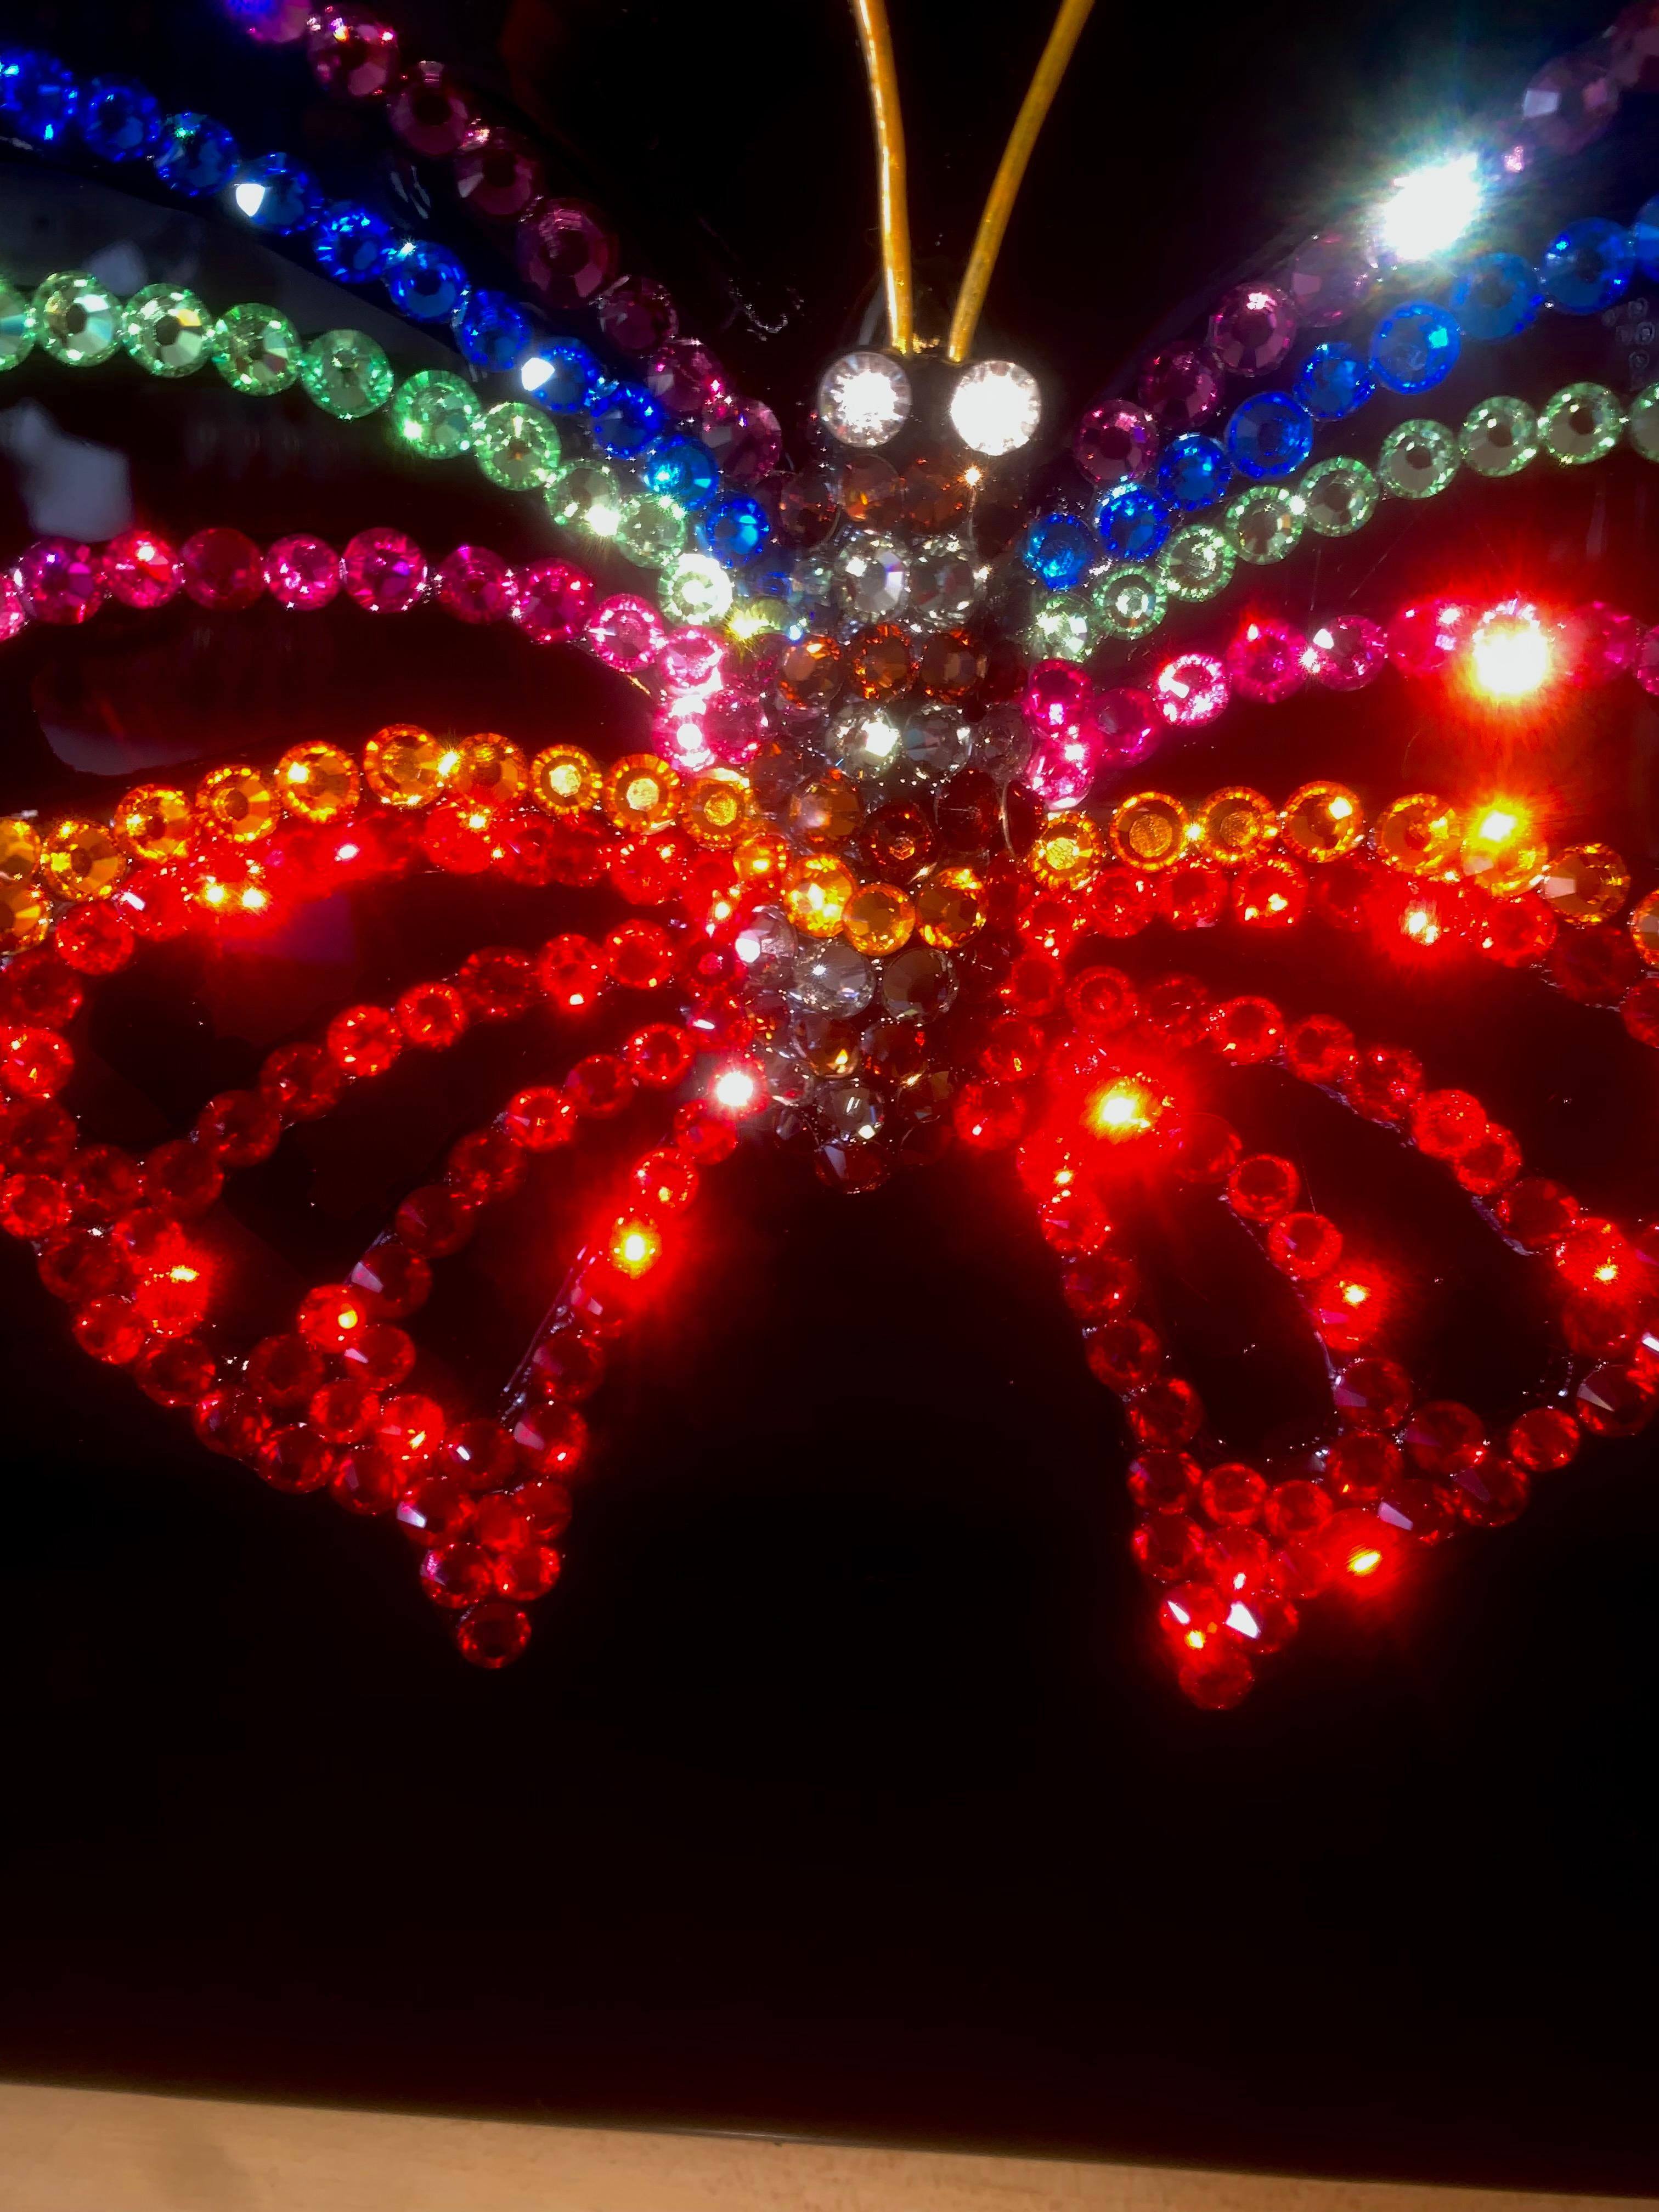 PRIDE BUTTERFLY (One of a Kind Swarovski Mixed Media Sculpture) - Brown Figurative Sculpture by Mauro Oliveira